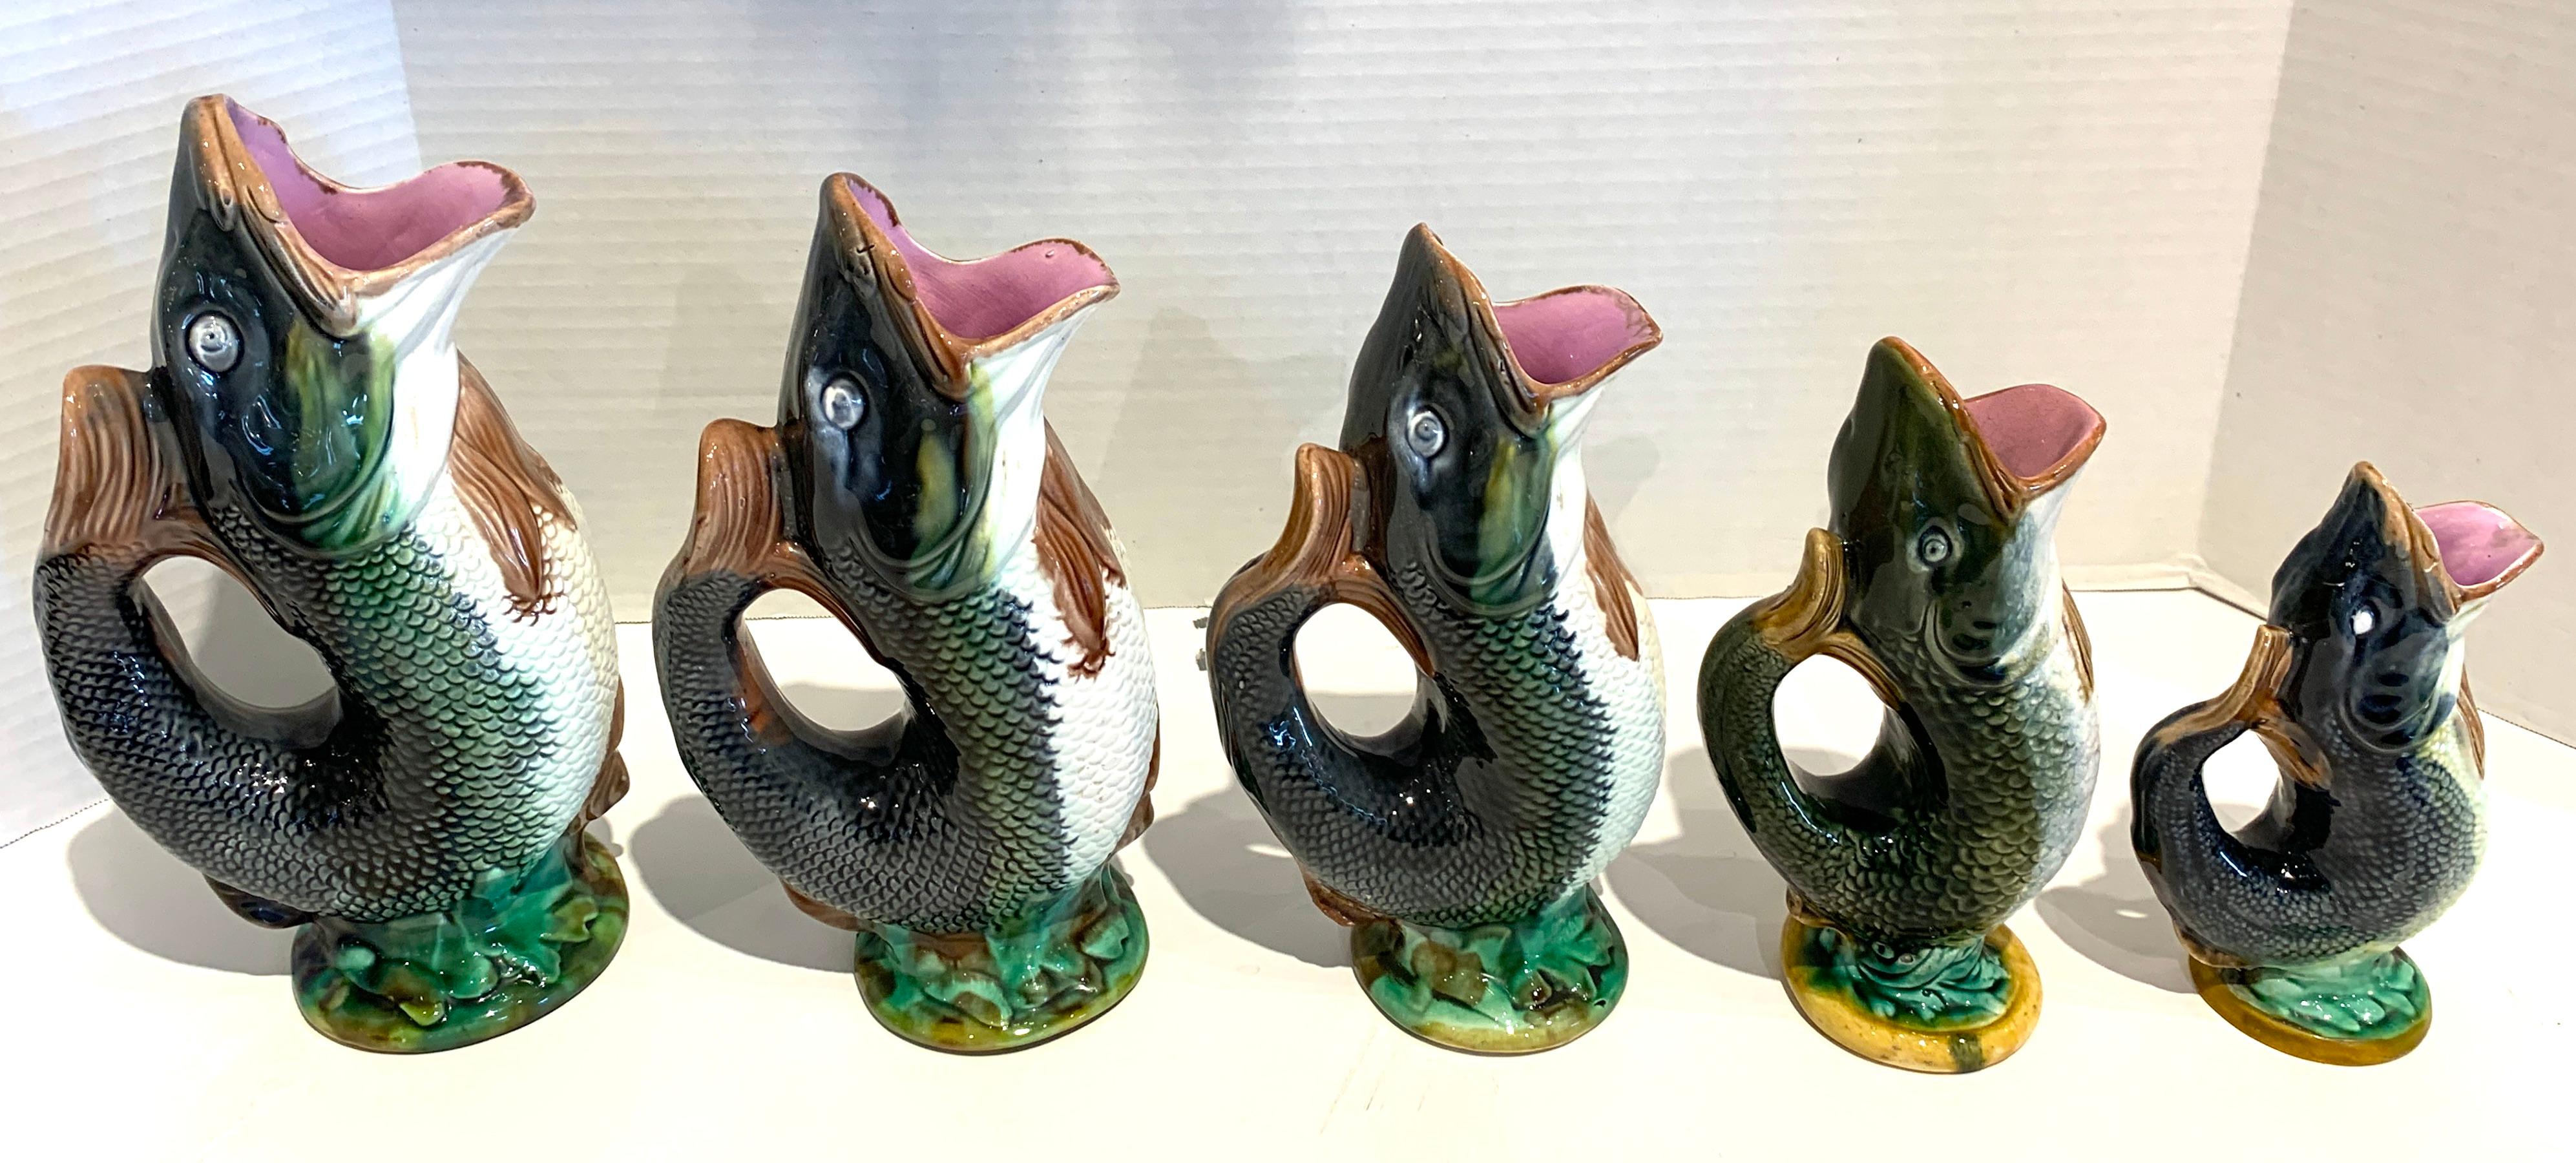 Five graduating majolica fish pitchers, by Adams & Bromley. A rare find.
Measures: Fish #1 -10.5